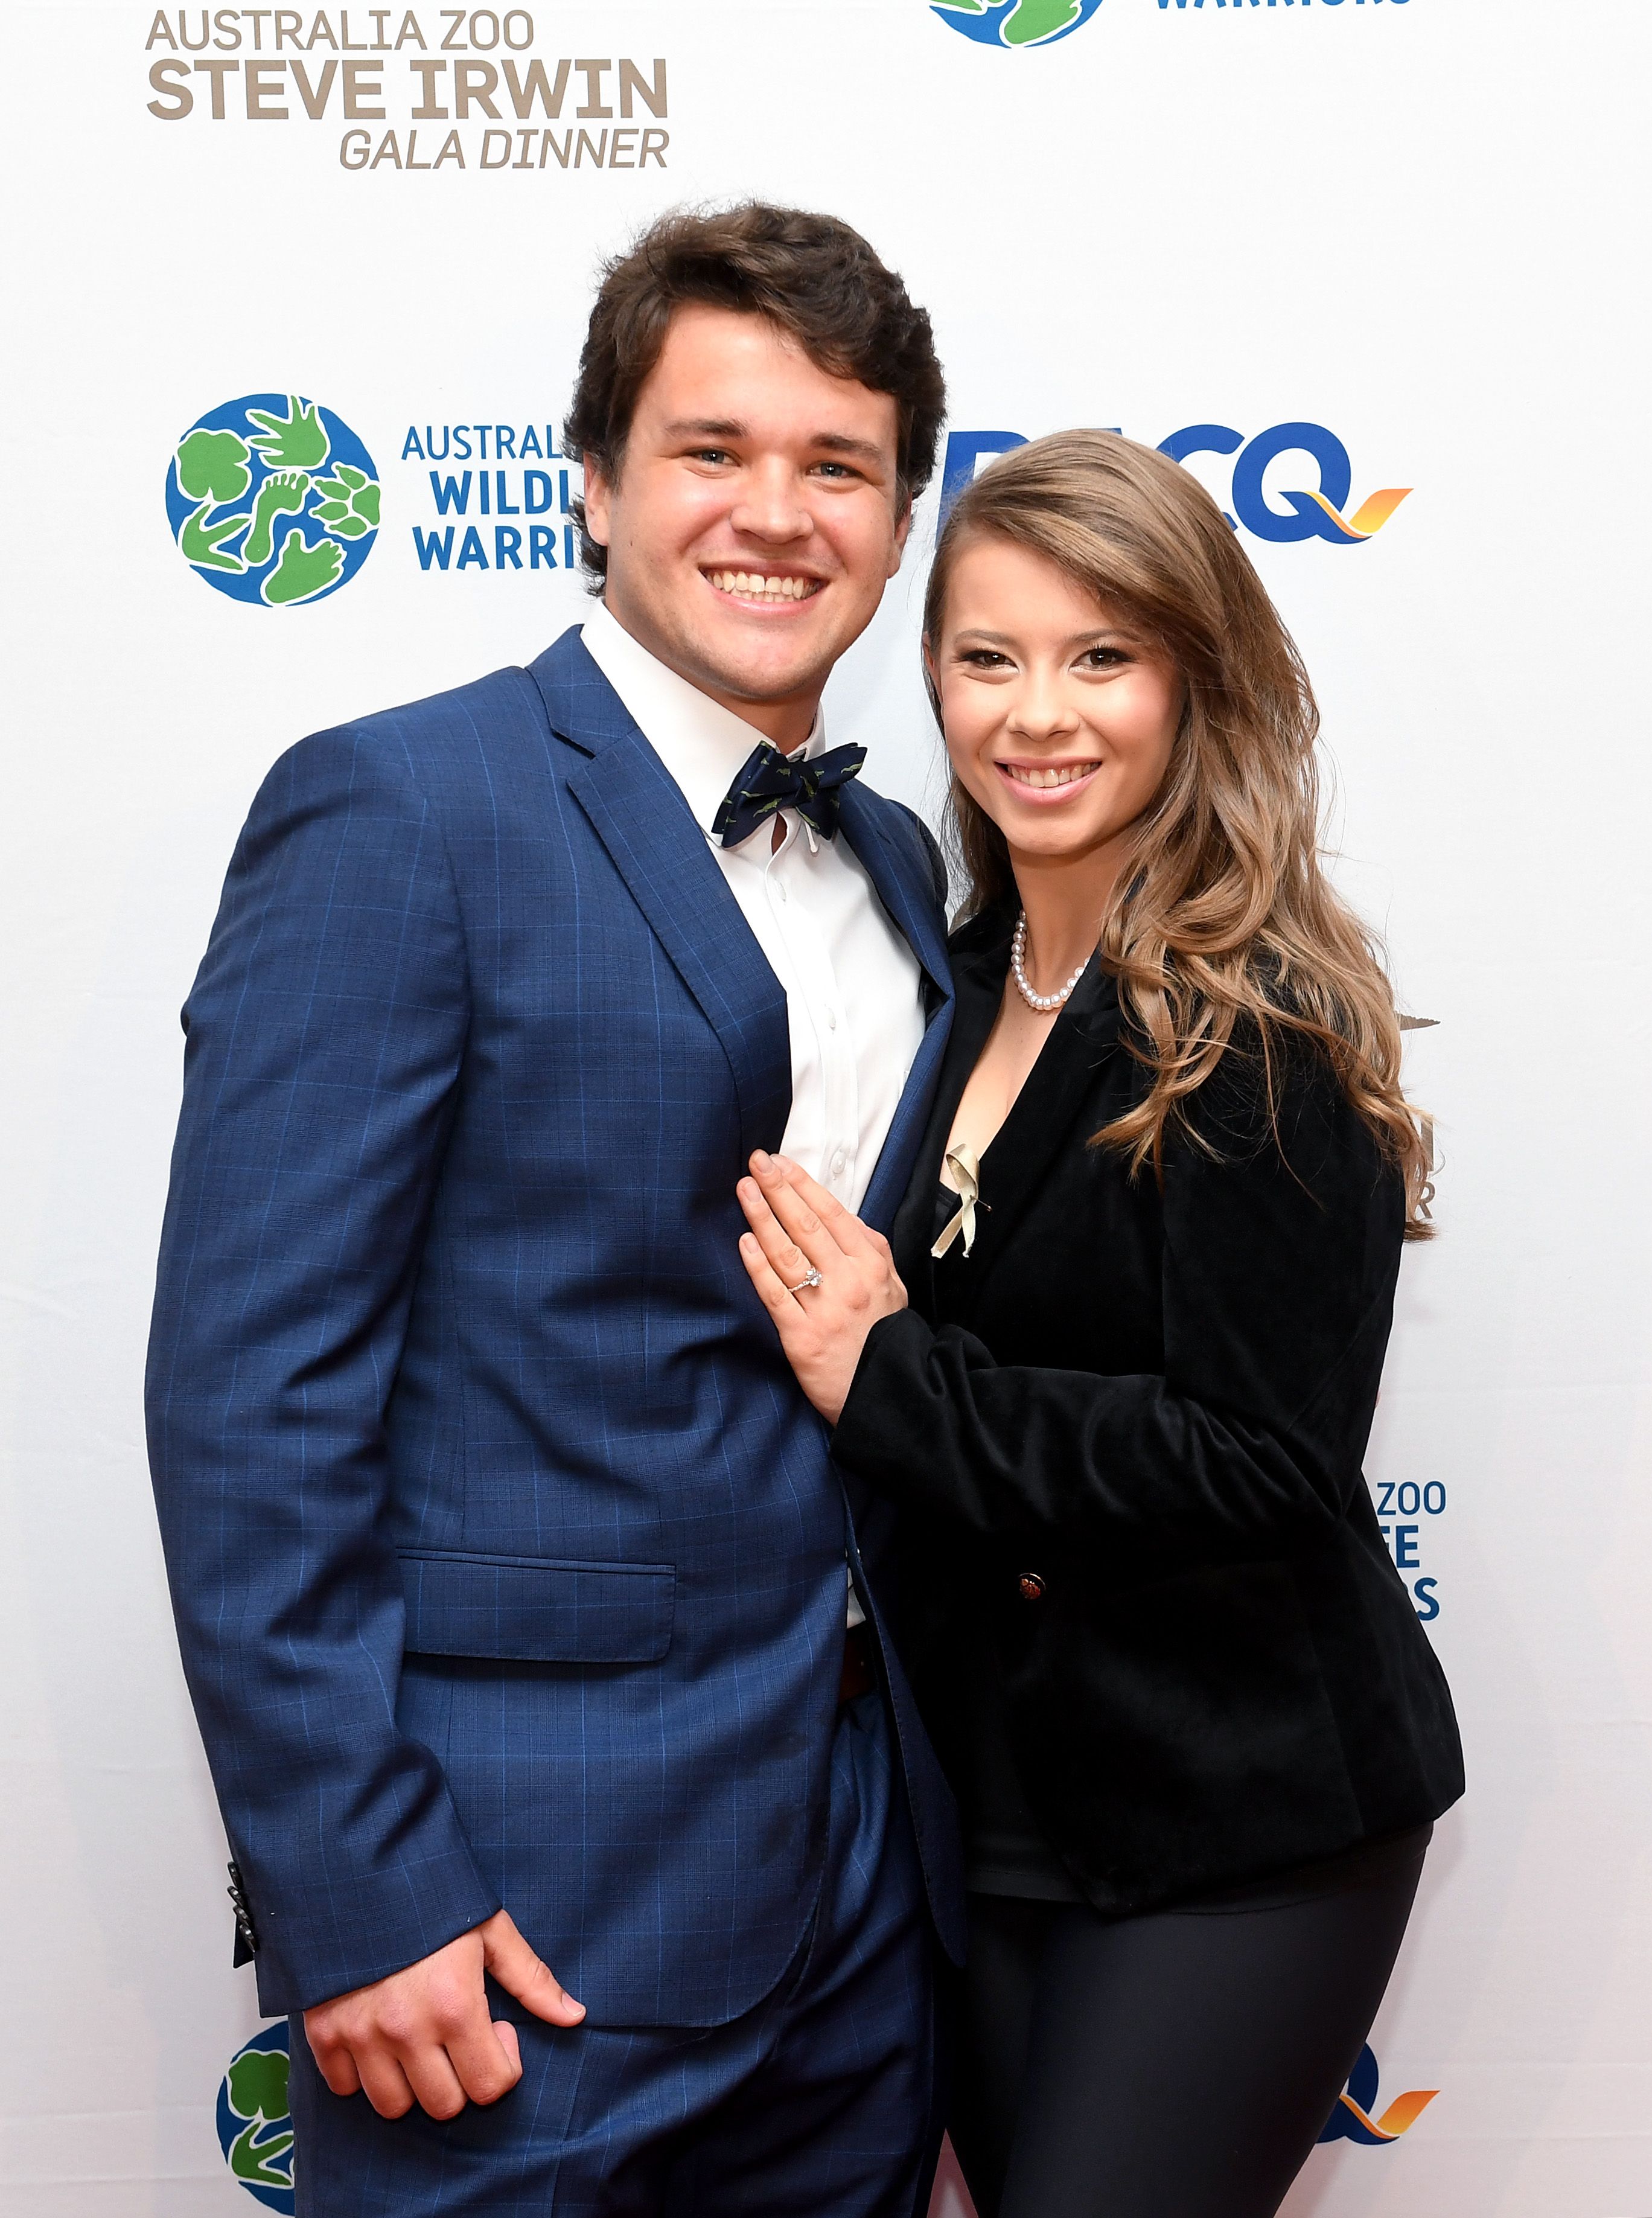 Bindi Irwin and Chandler Powell at the annual Steve Irwin Gala Dinner at Brisbane Convention & Exhibition Centre on November 09, 2019 in Brisbane, Australia | Photo: Getty Images